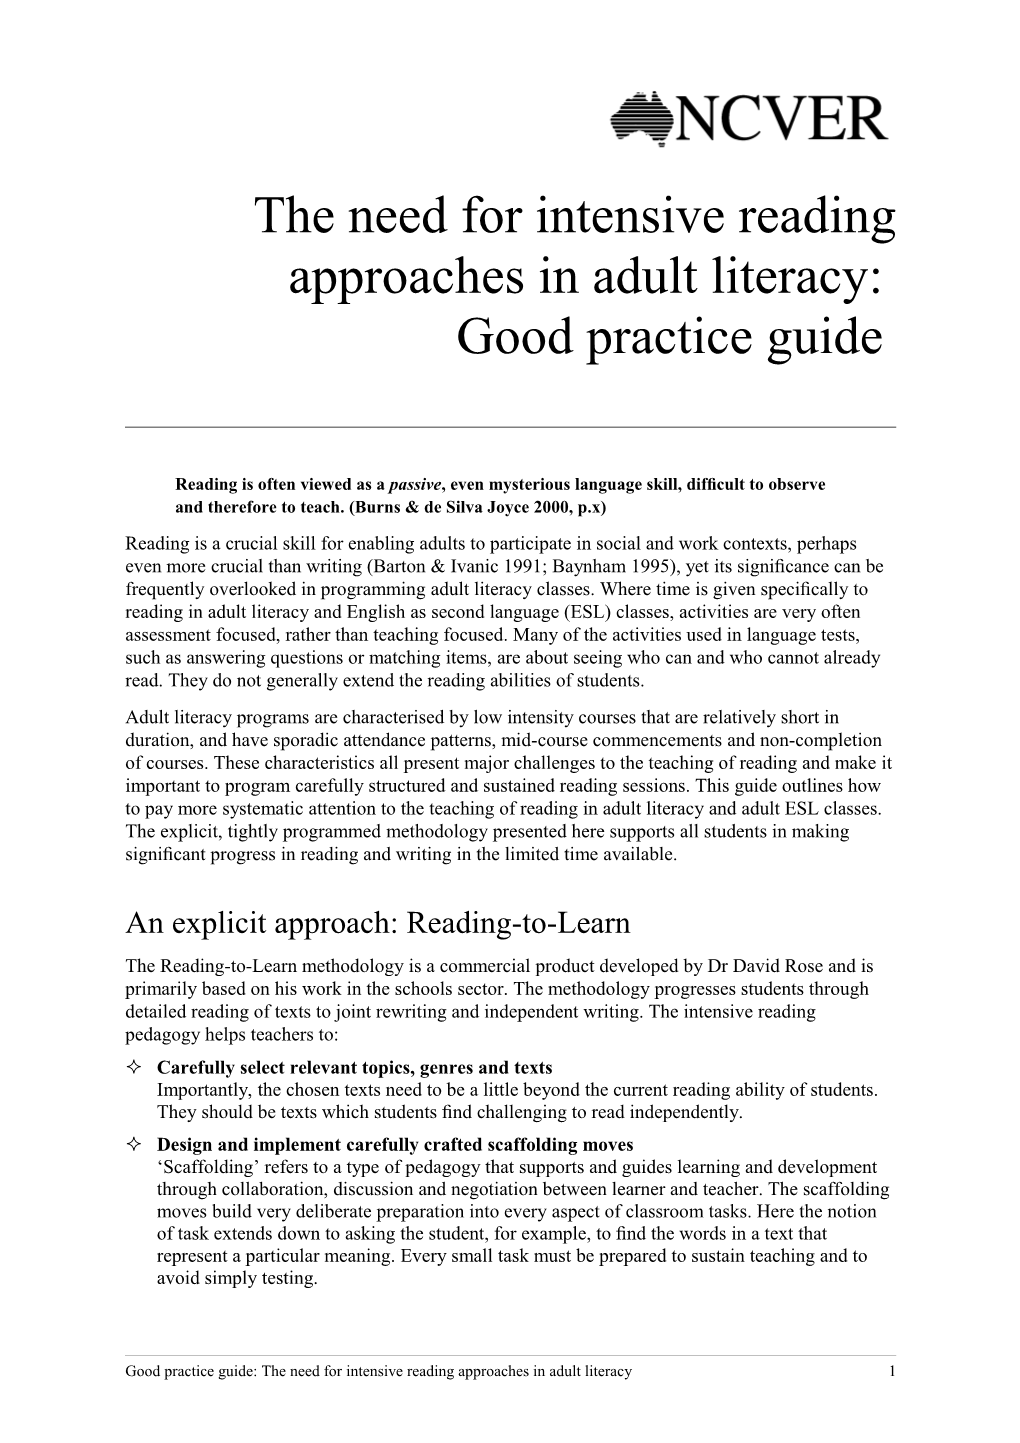 The Need for Intensive Reading Approaches in Adult Literacy: Good Practice Guide